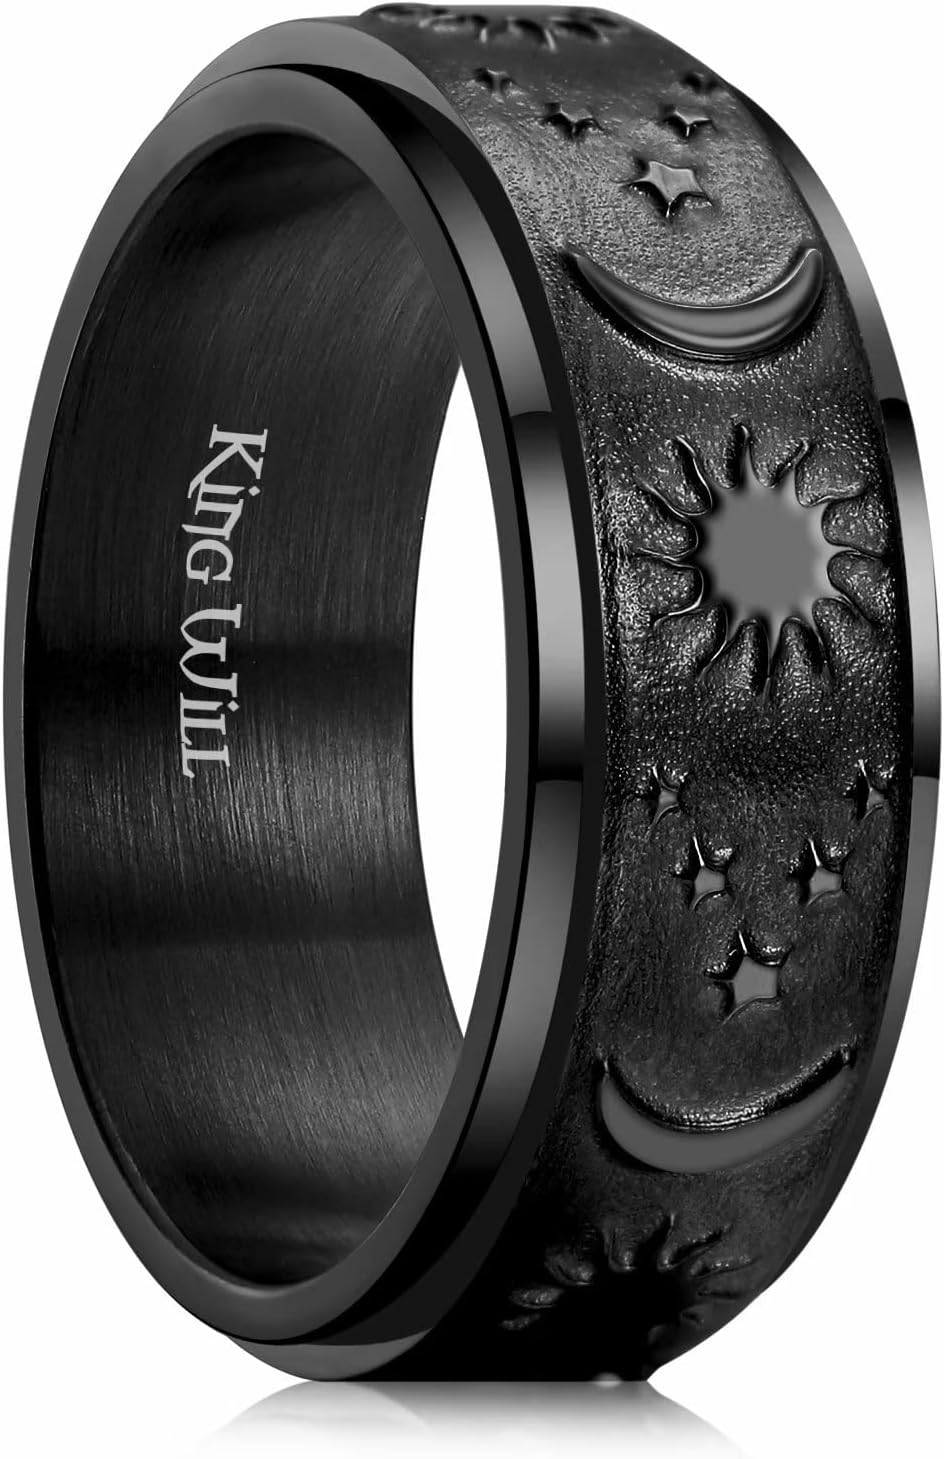 King Will Mens Fidget Ring Black/Gold/Rose Gold/Rainbow 8mm Stainless Steel Ring Spinner Ring For Men Women Stress Anxiety Relief Rotating Ring Finger Teens Toy Moon Sun Star/Triple Moon/Sand Blasted Comfort Fit For Unisex Adults